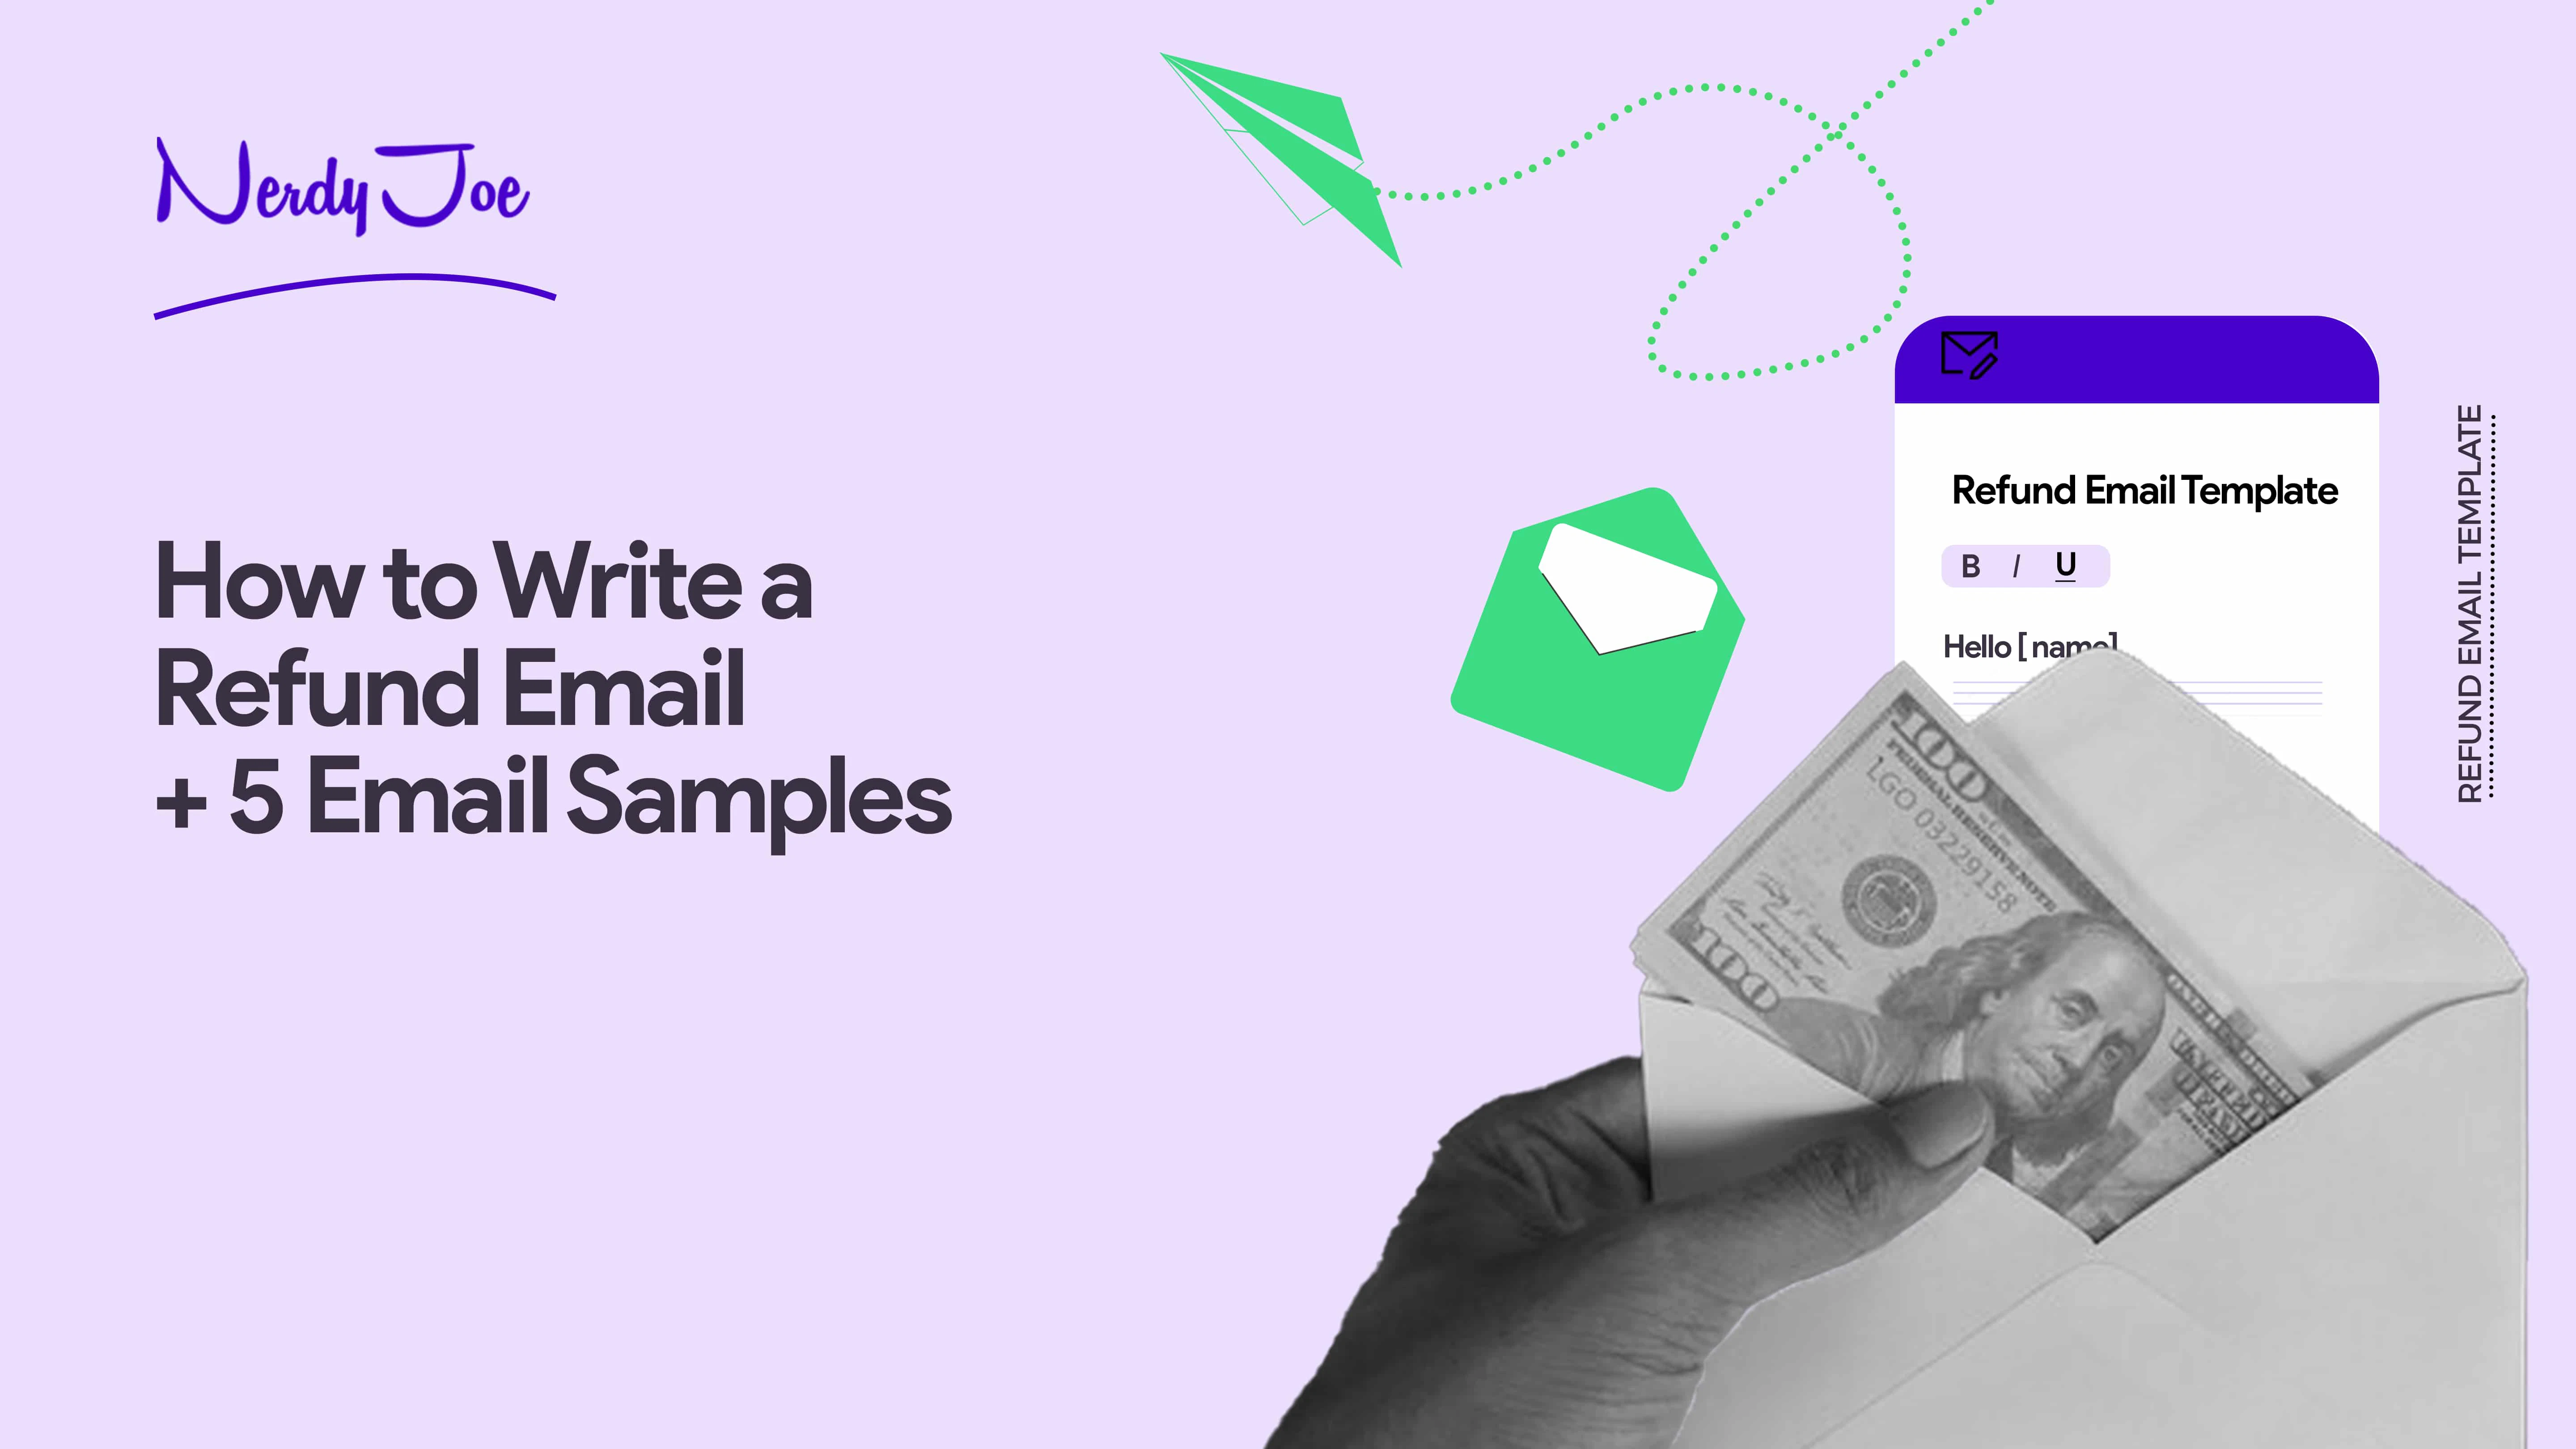 How to Write a Refund Email With 5 Templates From Experts